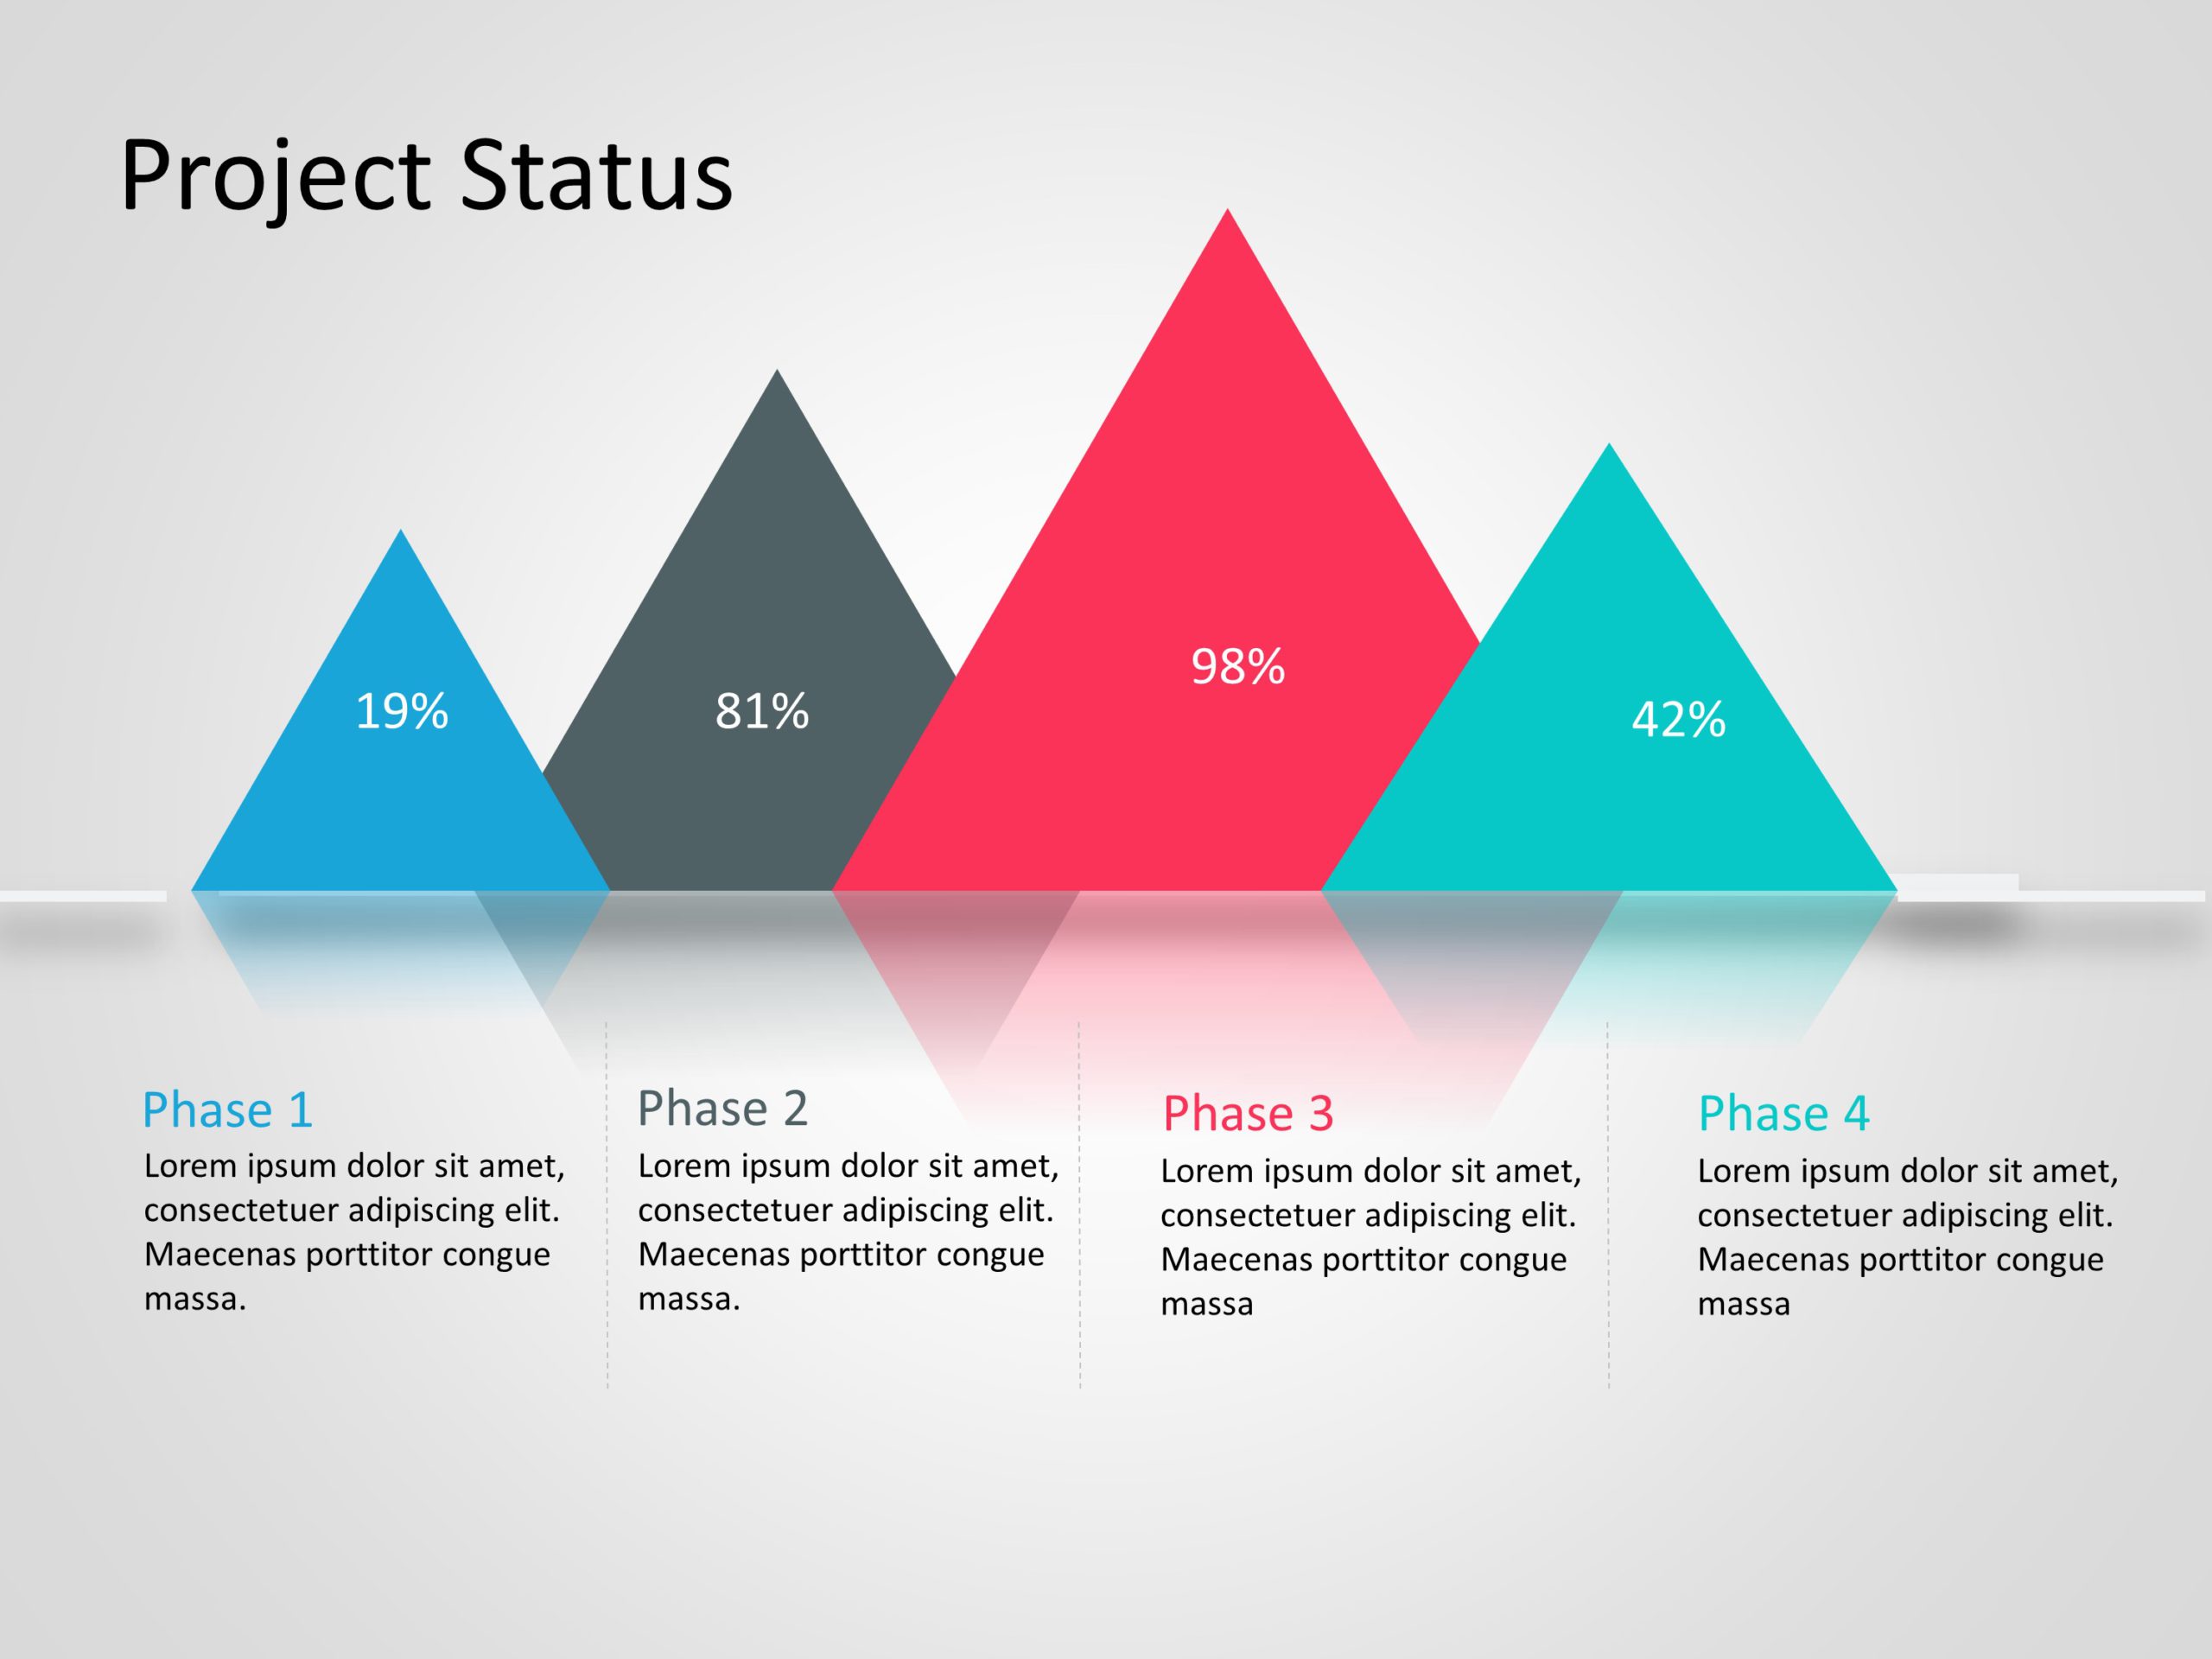 Project Status 1 PowerPoint Template